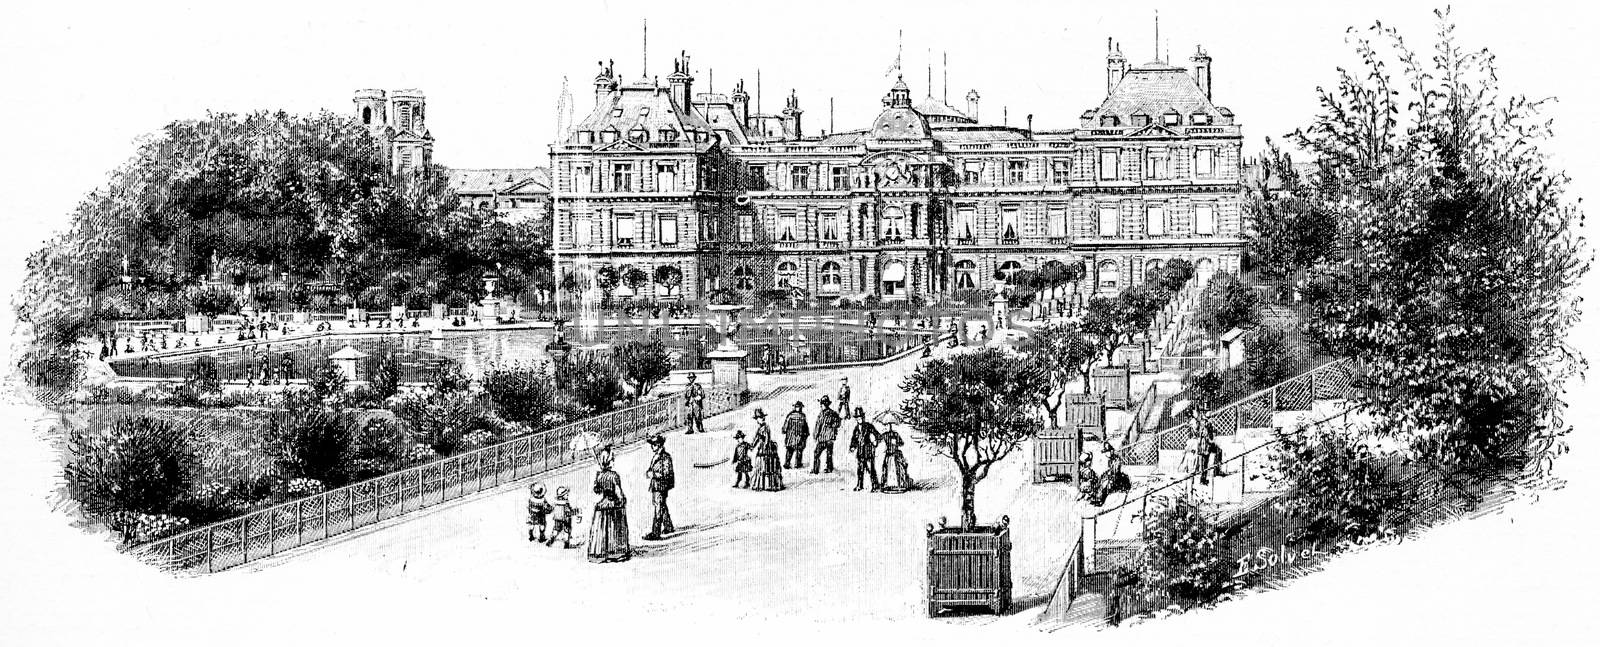 The grand facade of the Palace Garden, vintage engraving. by Morphart